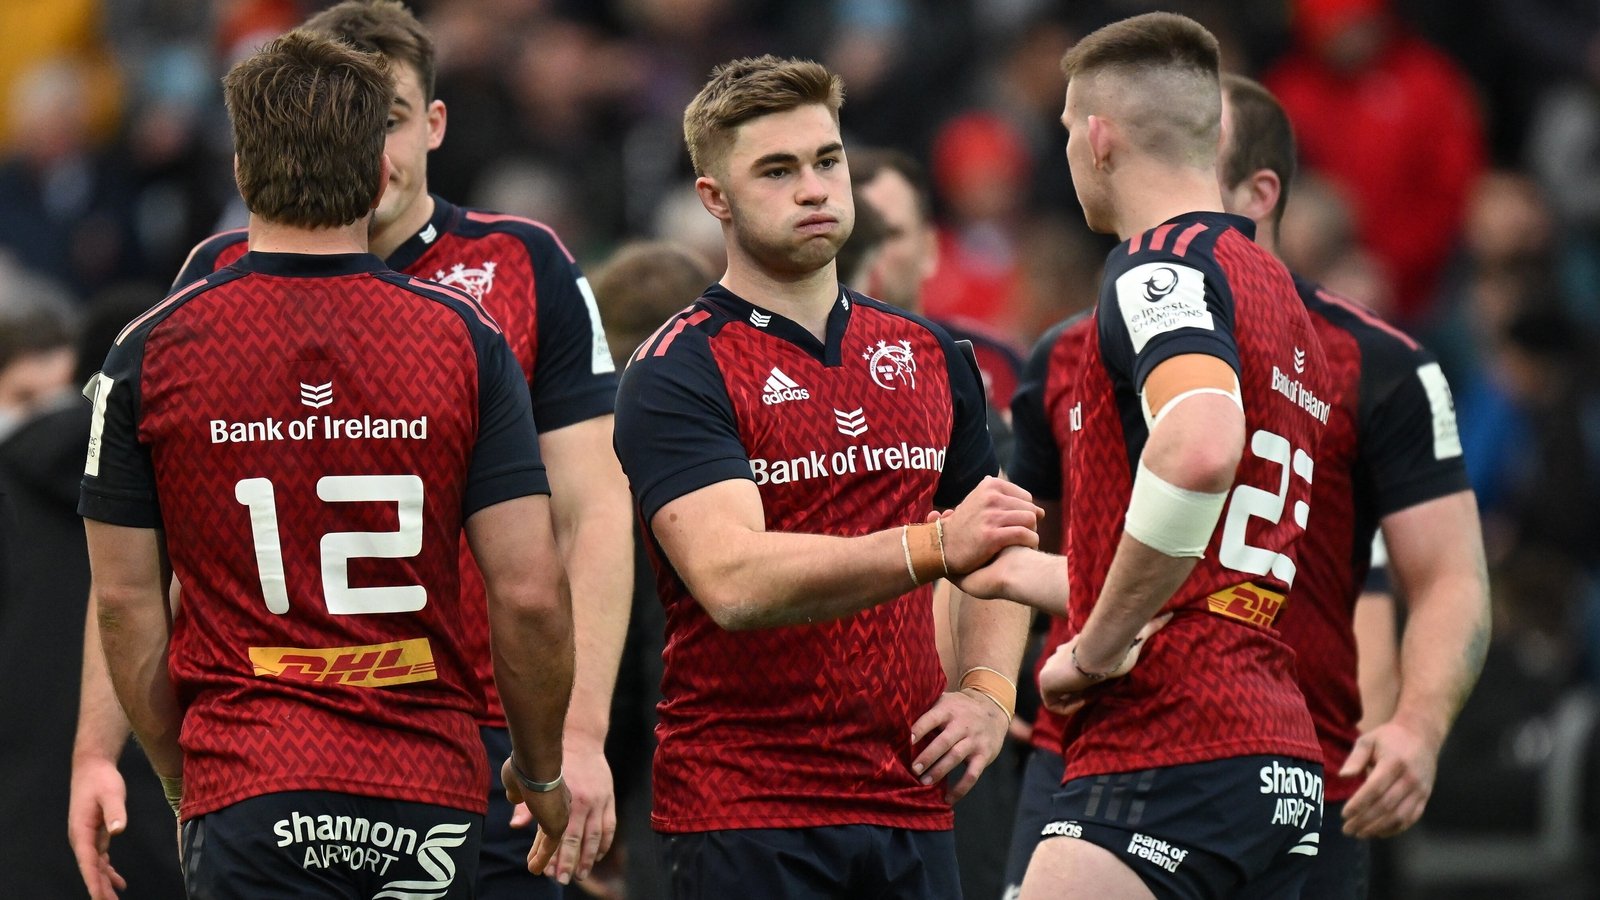 Munster 17-17 Bayonne: Visitors score late try to earn draw